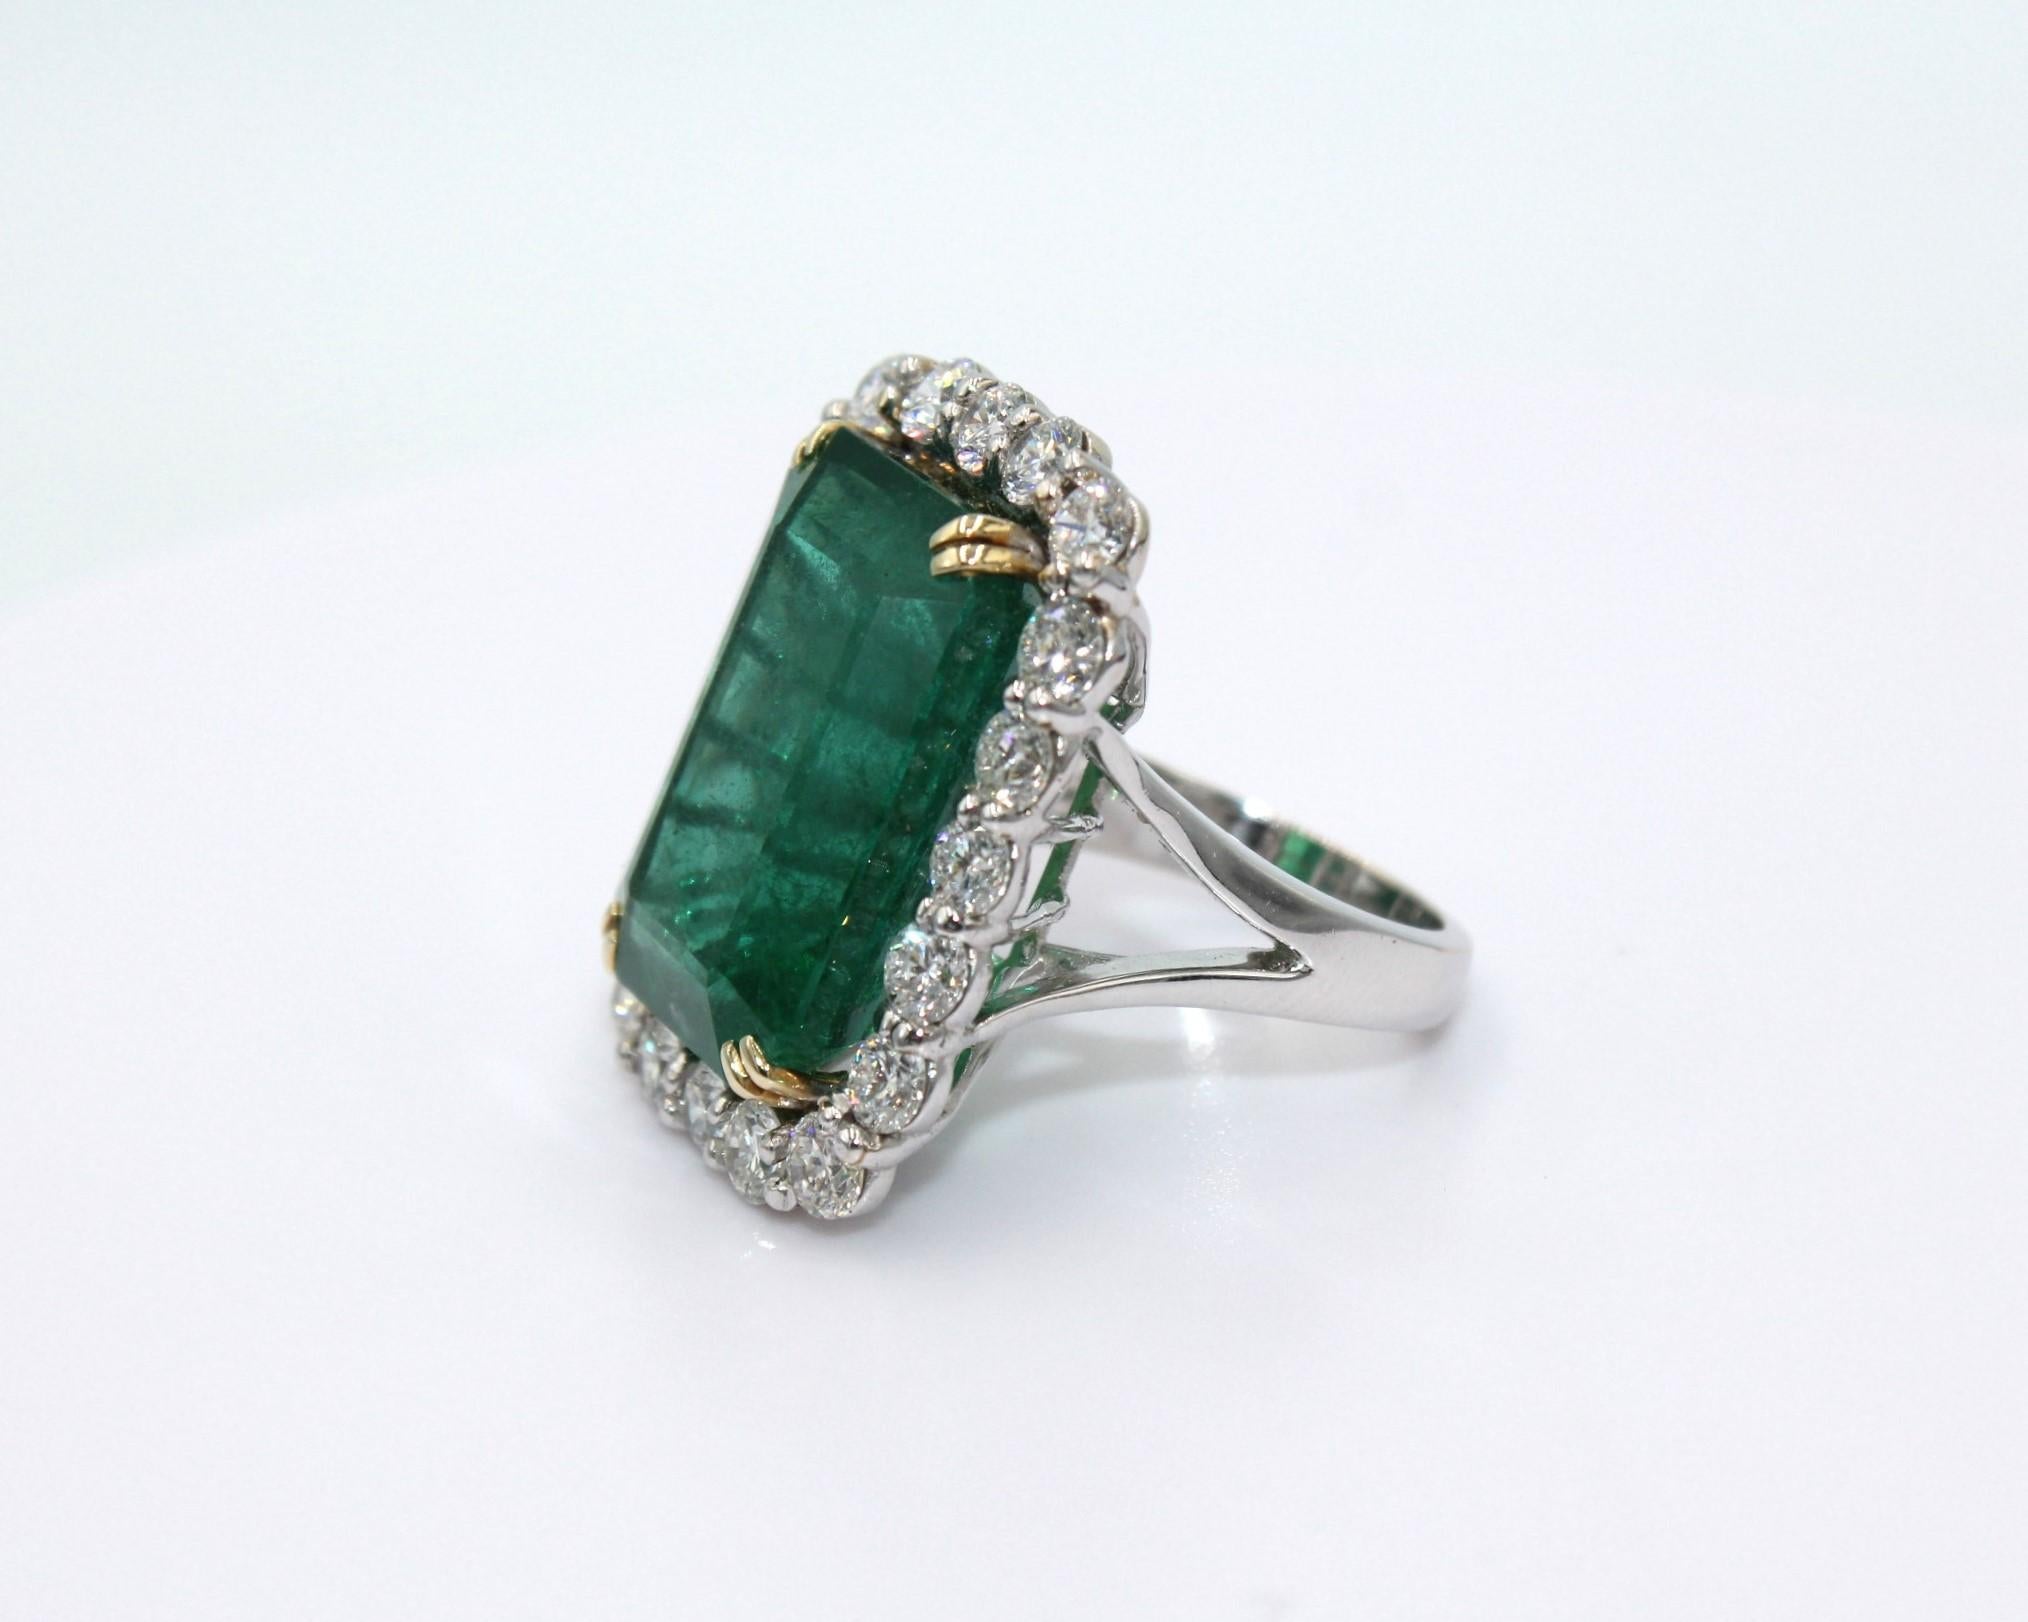 28.78 carats Emerald Cut Zambian Emerald, framed with 20 round diamonds totaling a diamond weight of 4.13 carats. 

This stunning Emerald Diamond Ring will highlight your elegance and uniqueness. 

Item Details:
- Type: Ring
- Metal: 18K Gold
-